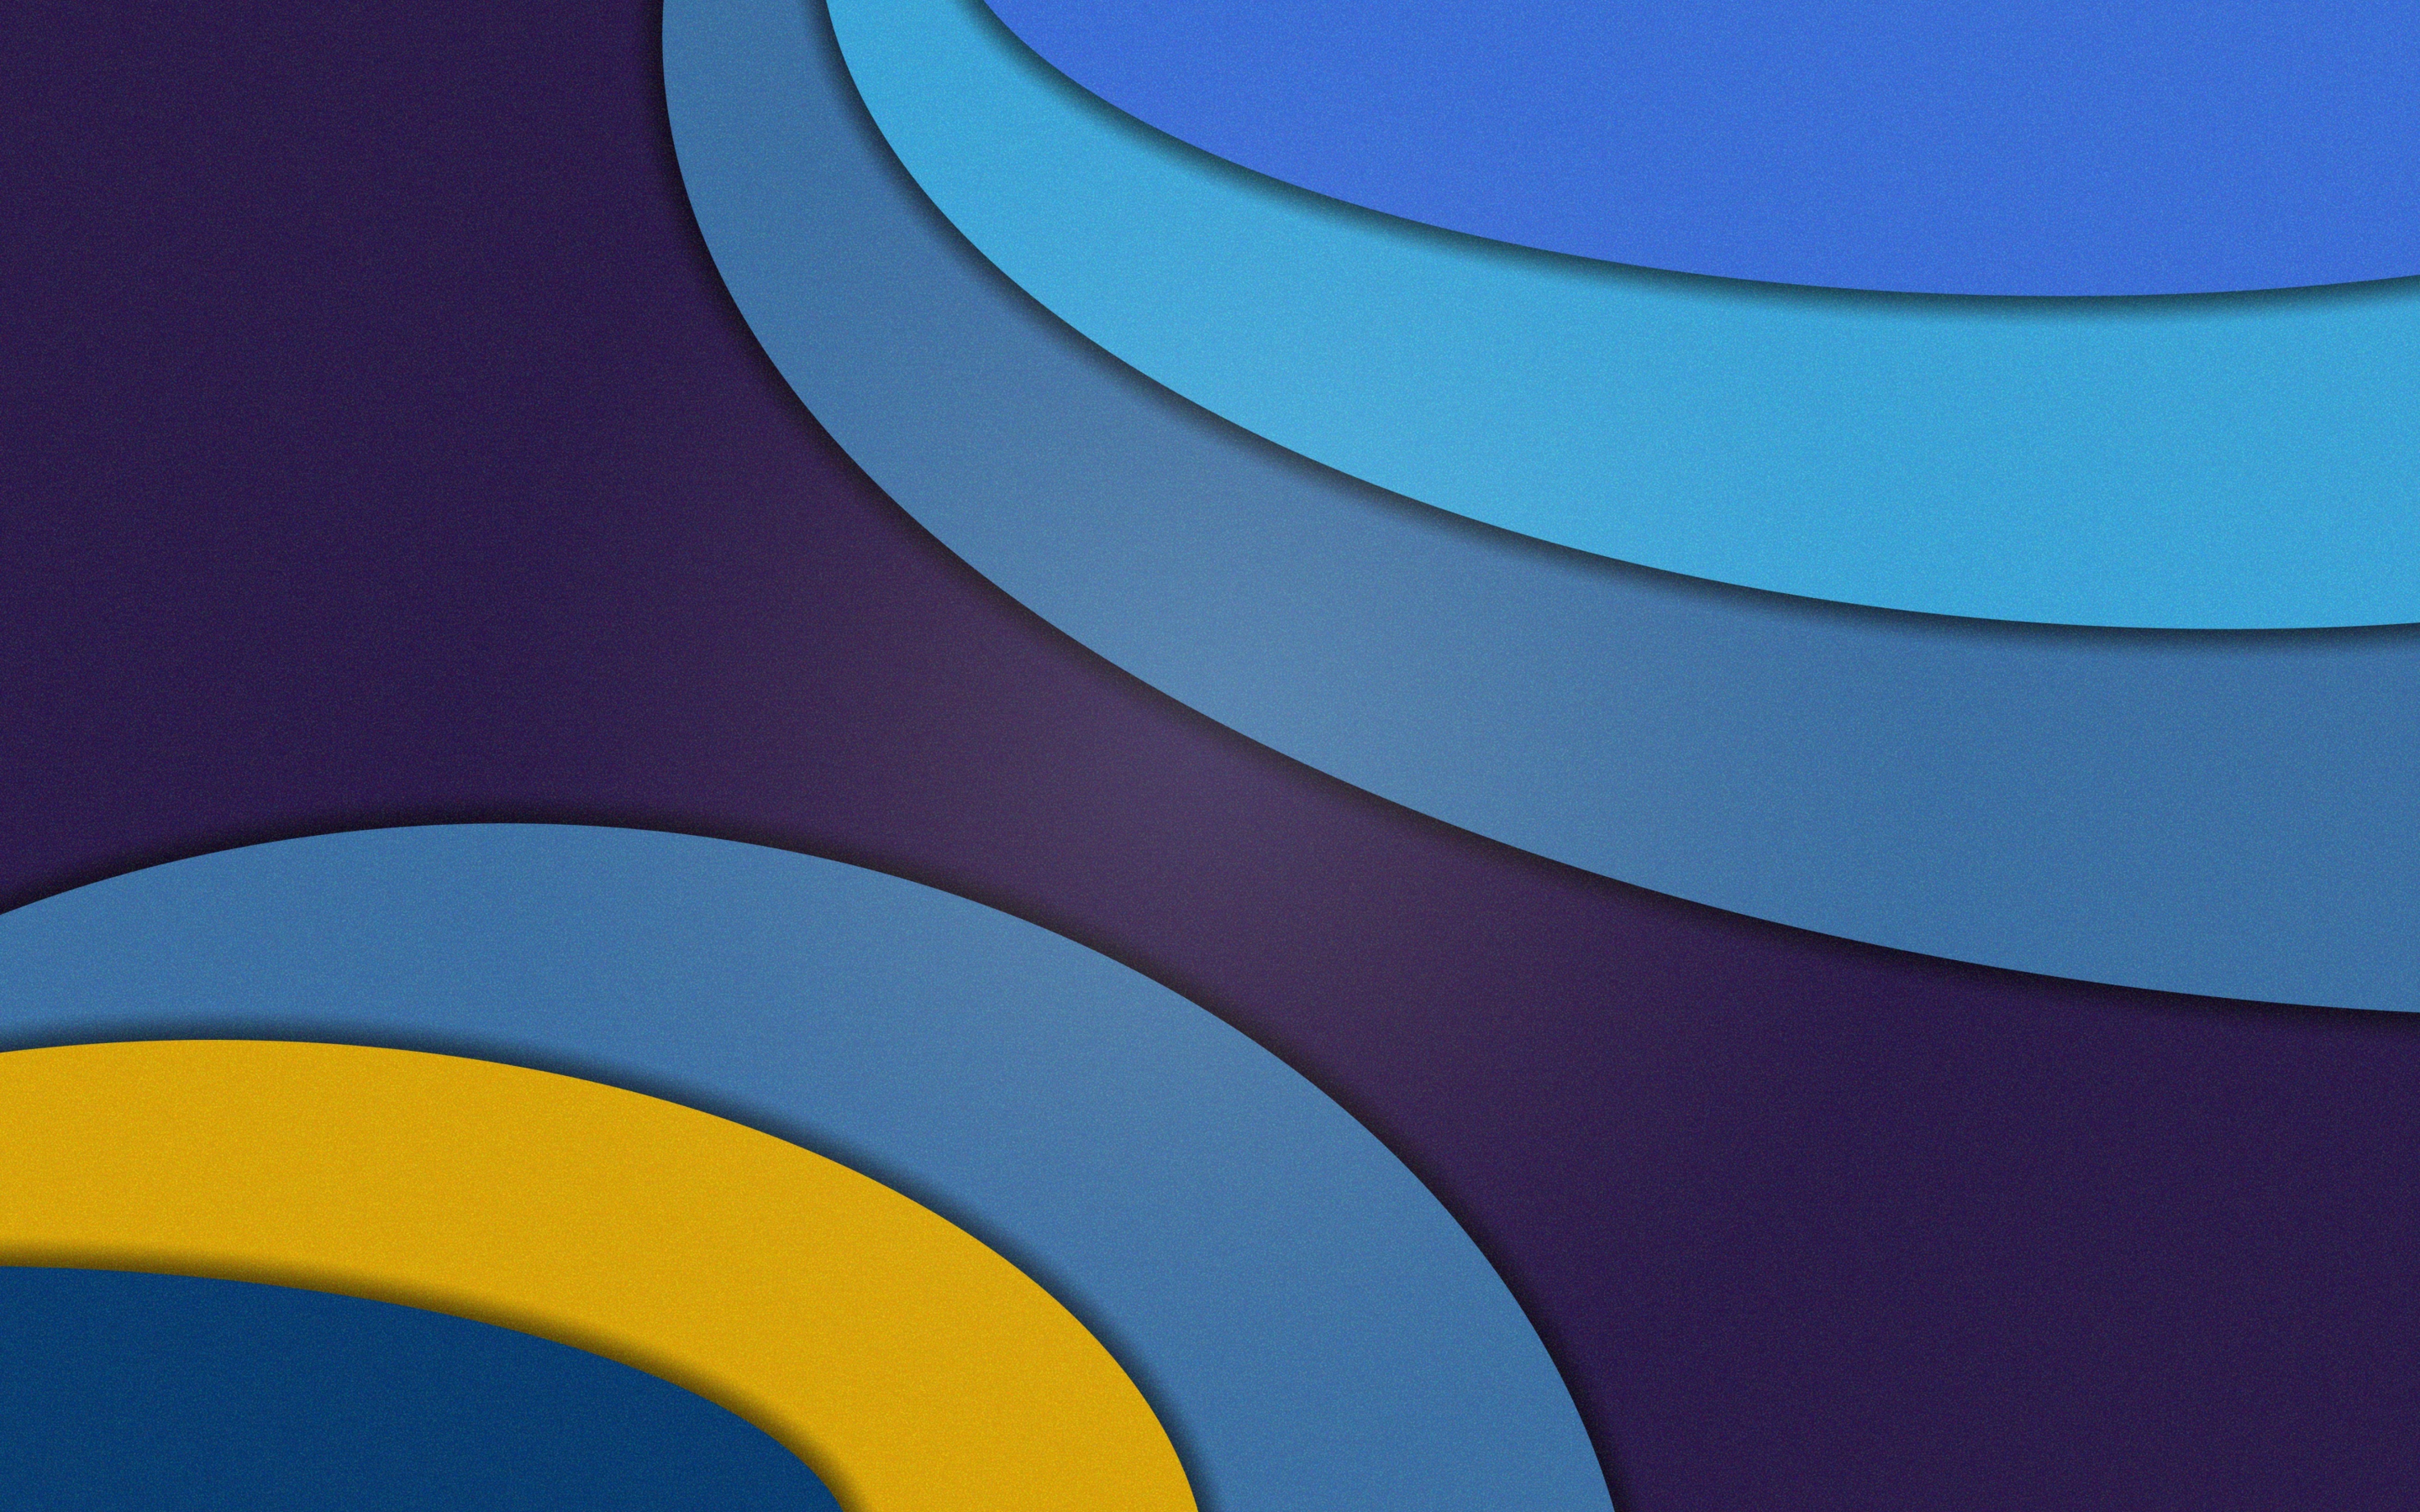 Material design, curves, abstract, 2880x1800 wallpaper